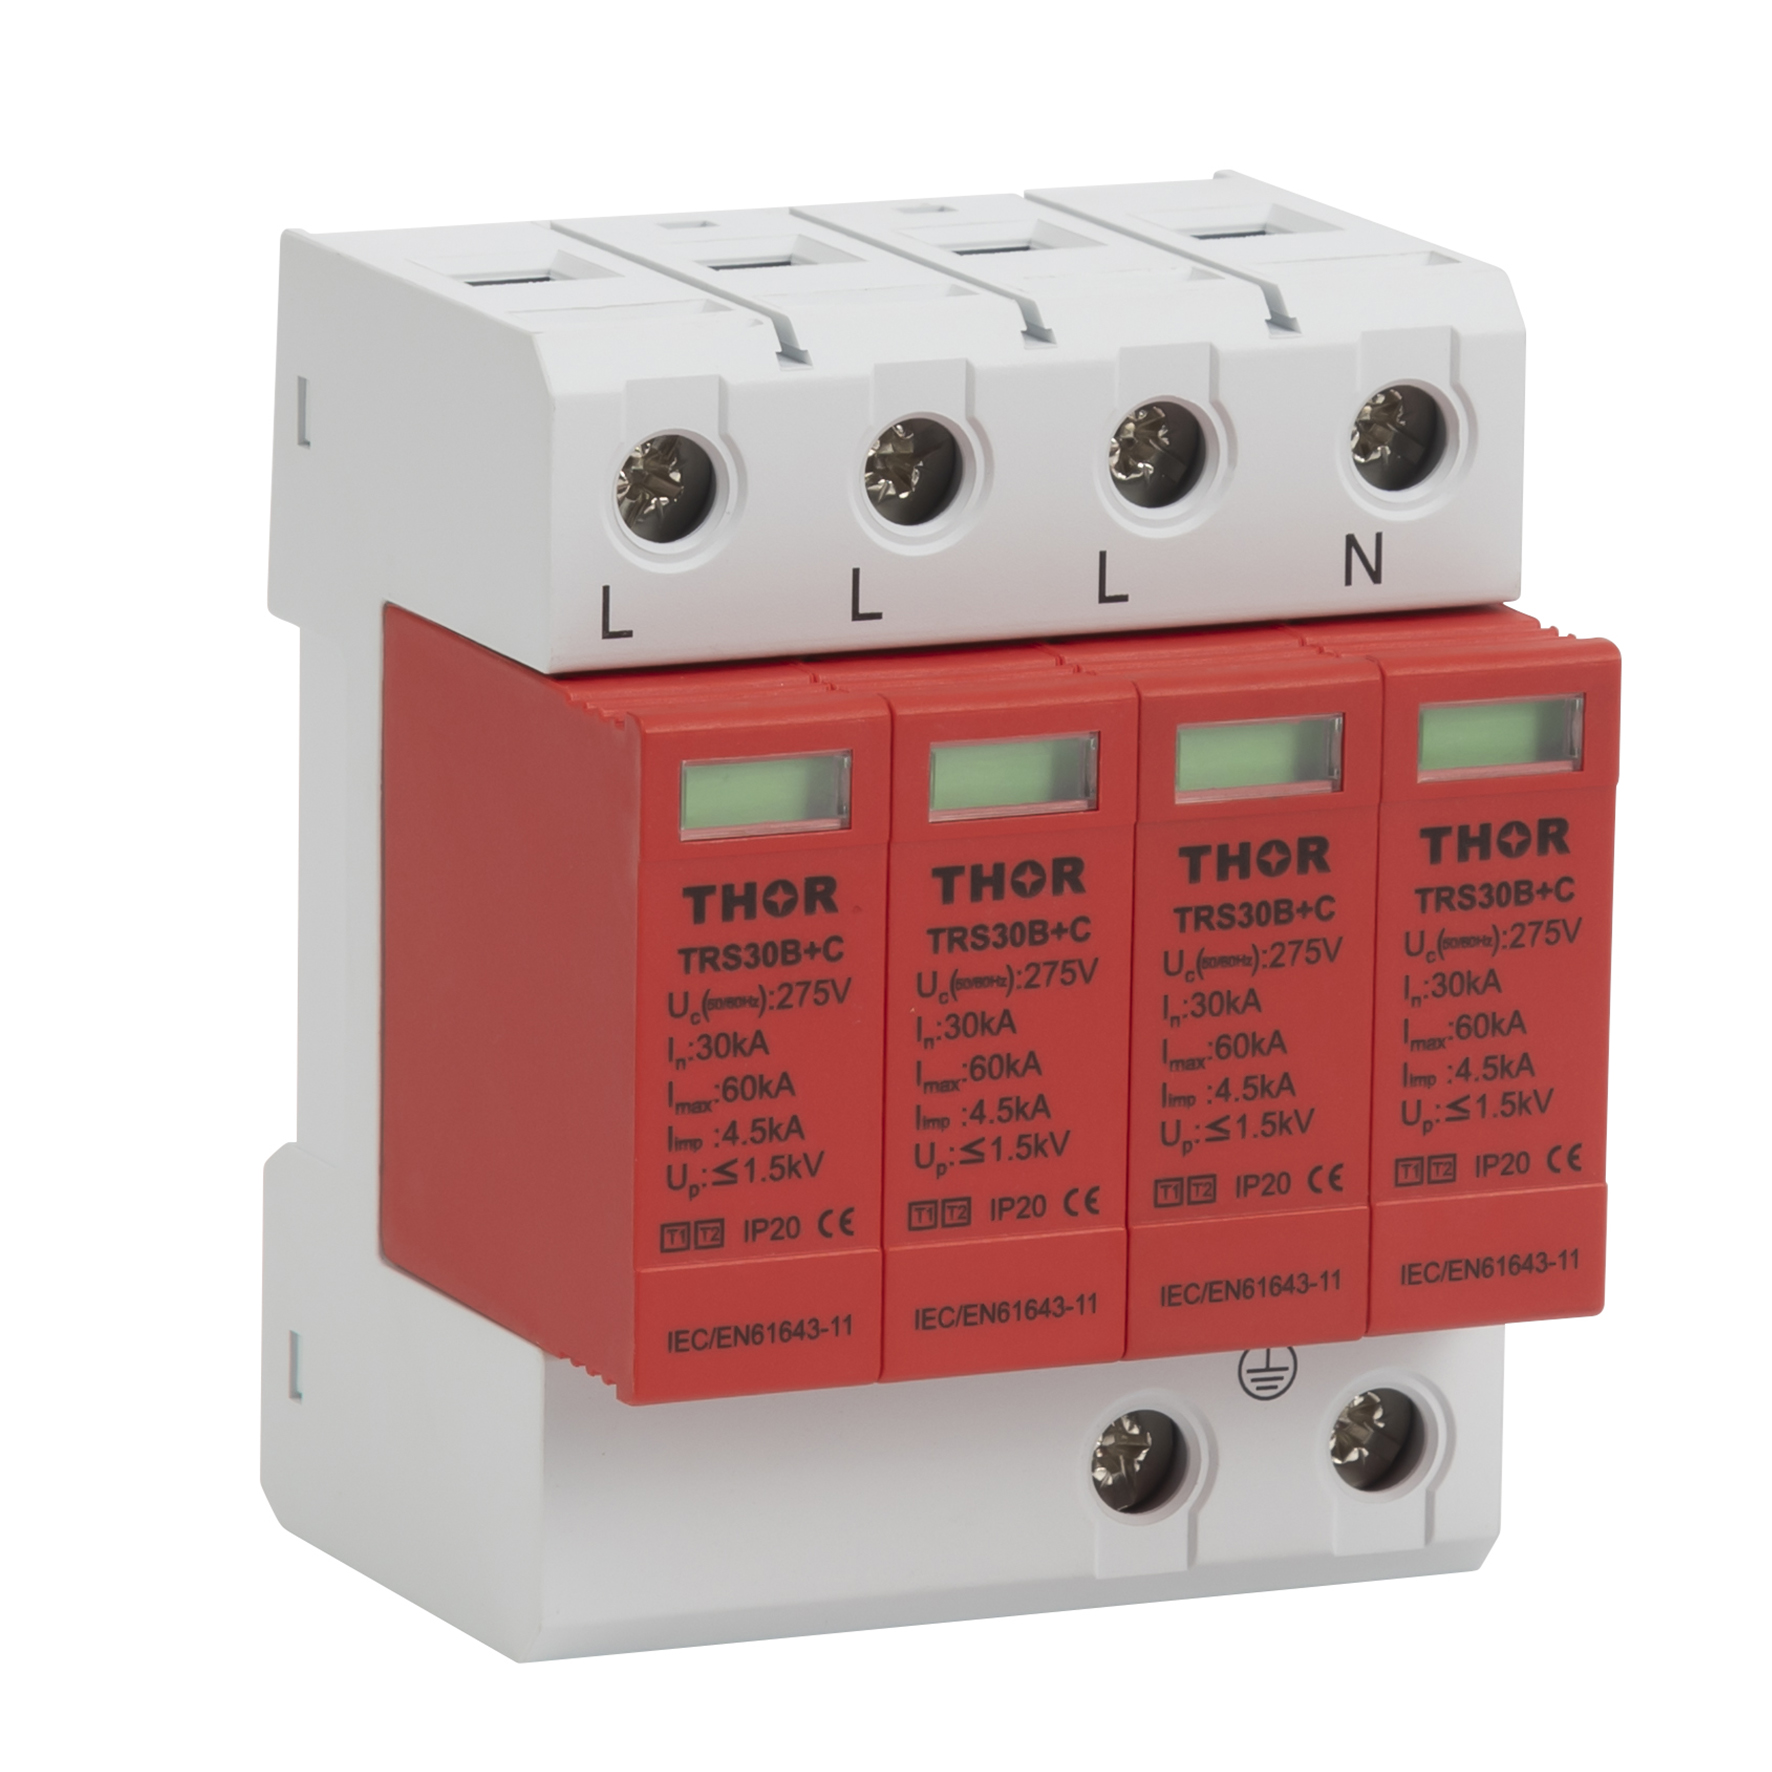 surge protection device,surge protector,spd,surge protection,lightning protection